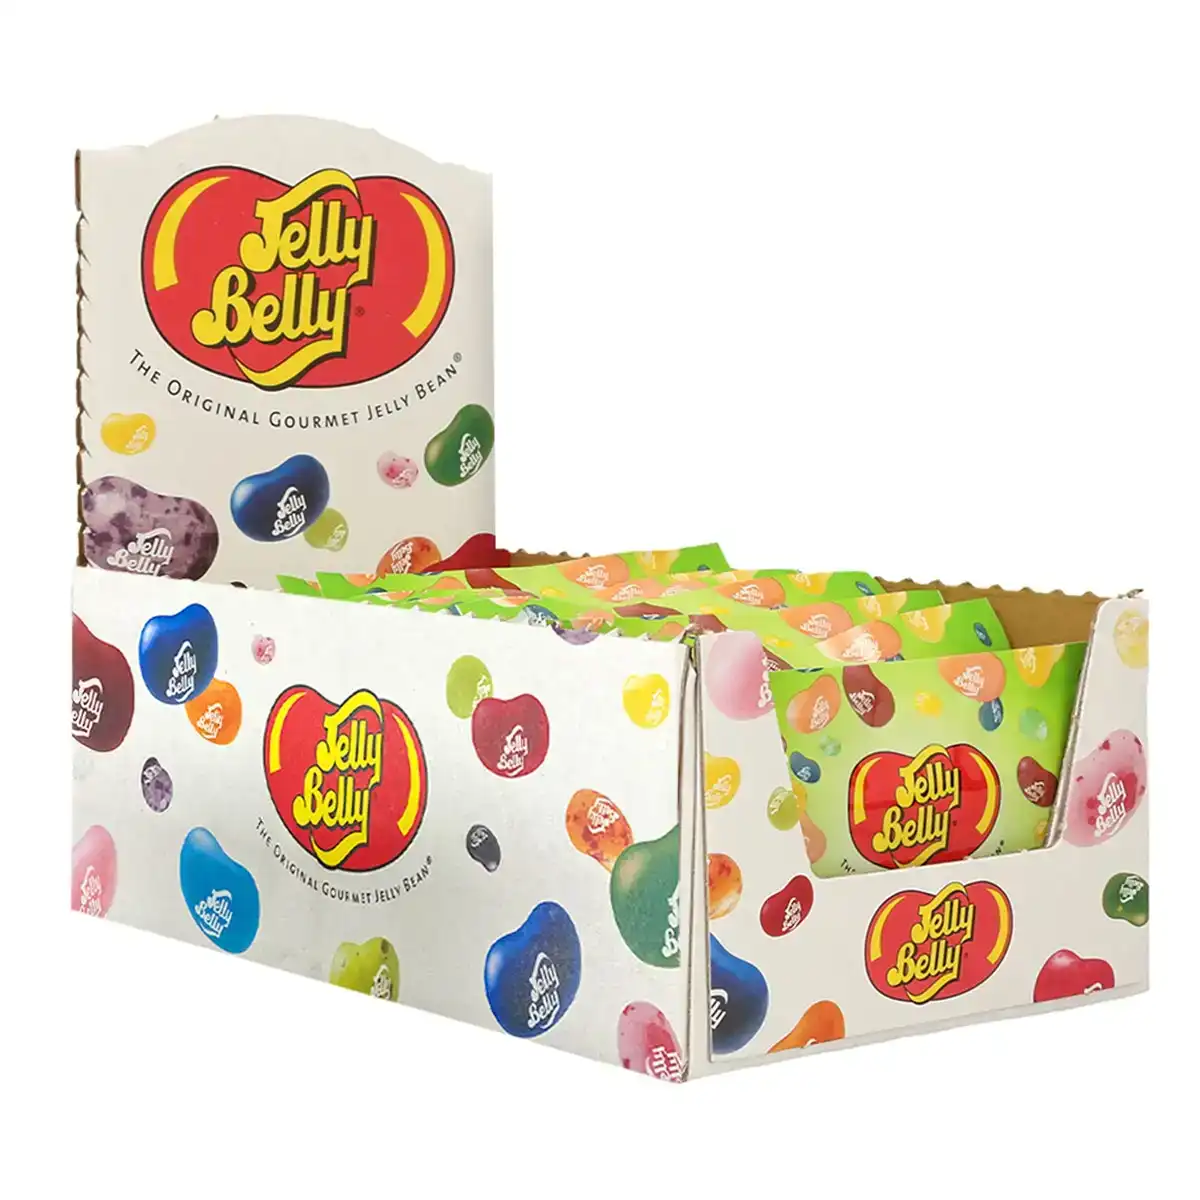 30pc Jelly Belly 28g Sours Jelly Beans Pouch Chewy Confectionery Sweets Candy